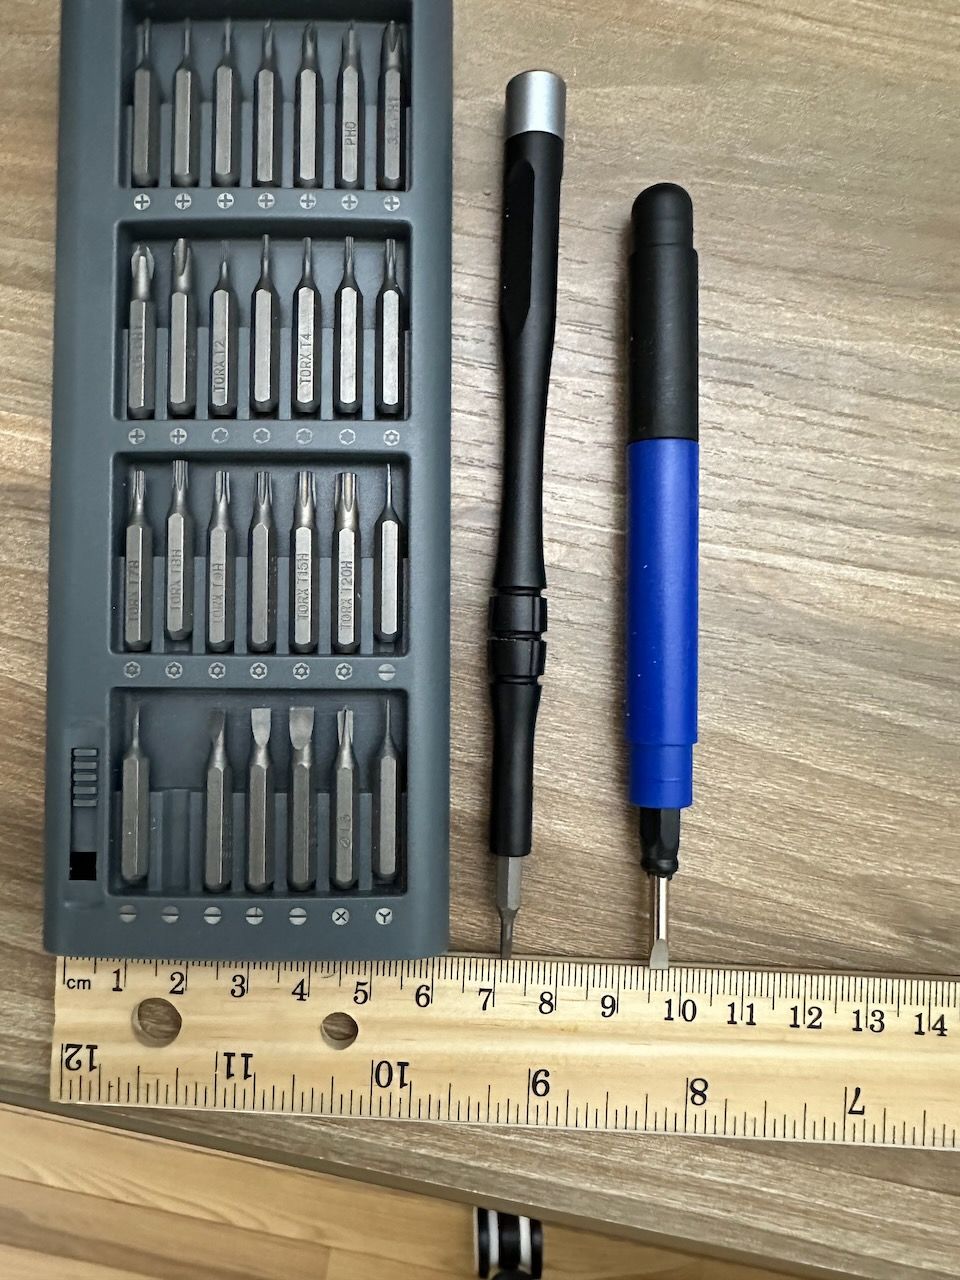 A screw driver set with two screw drivers lined up next to a ruler for scale.